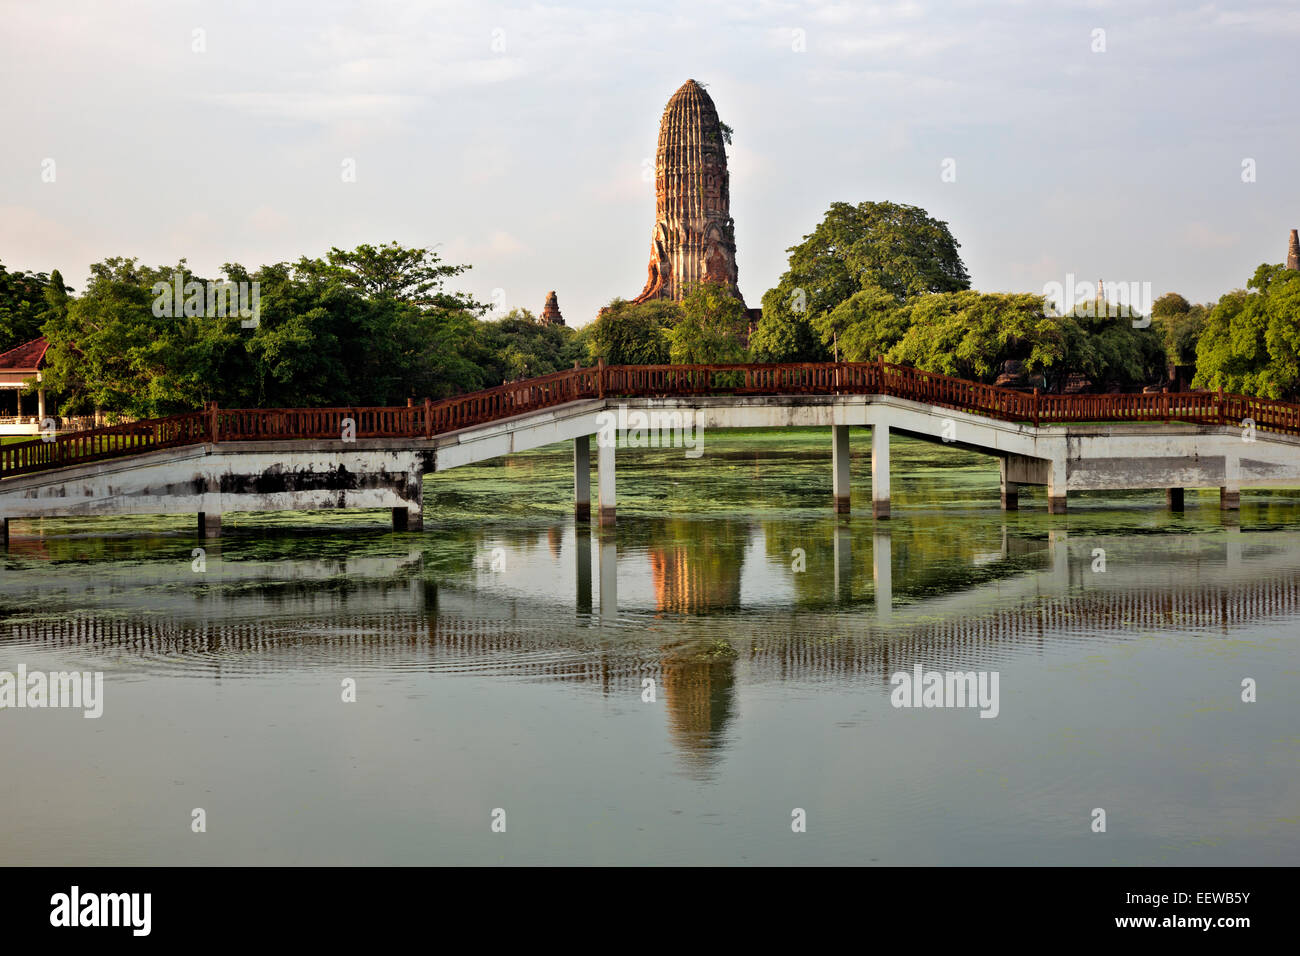 THAILAND - Bridge over a canal in Phra Ram Park located at center of the Ayutthaya Historical Park and the chedi at Wat Phra Ram Stock Photo